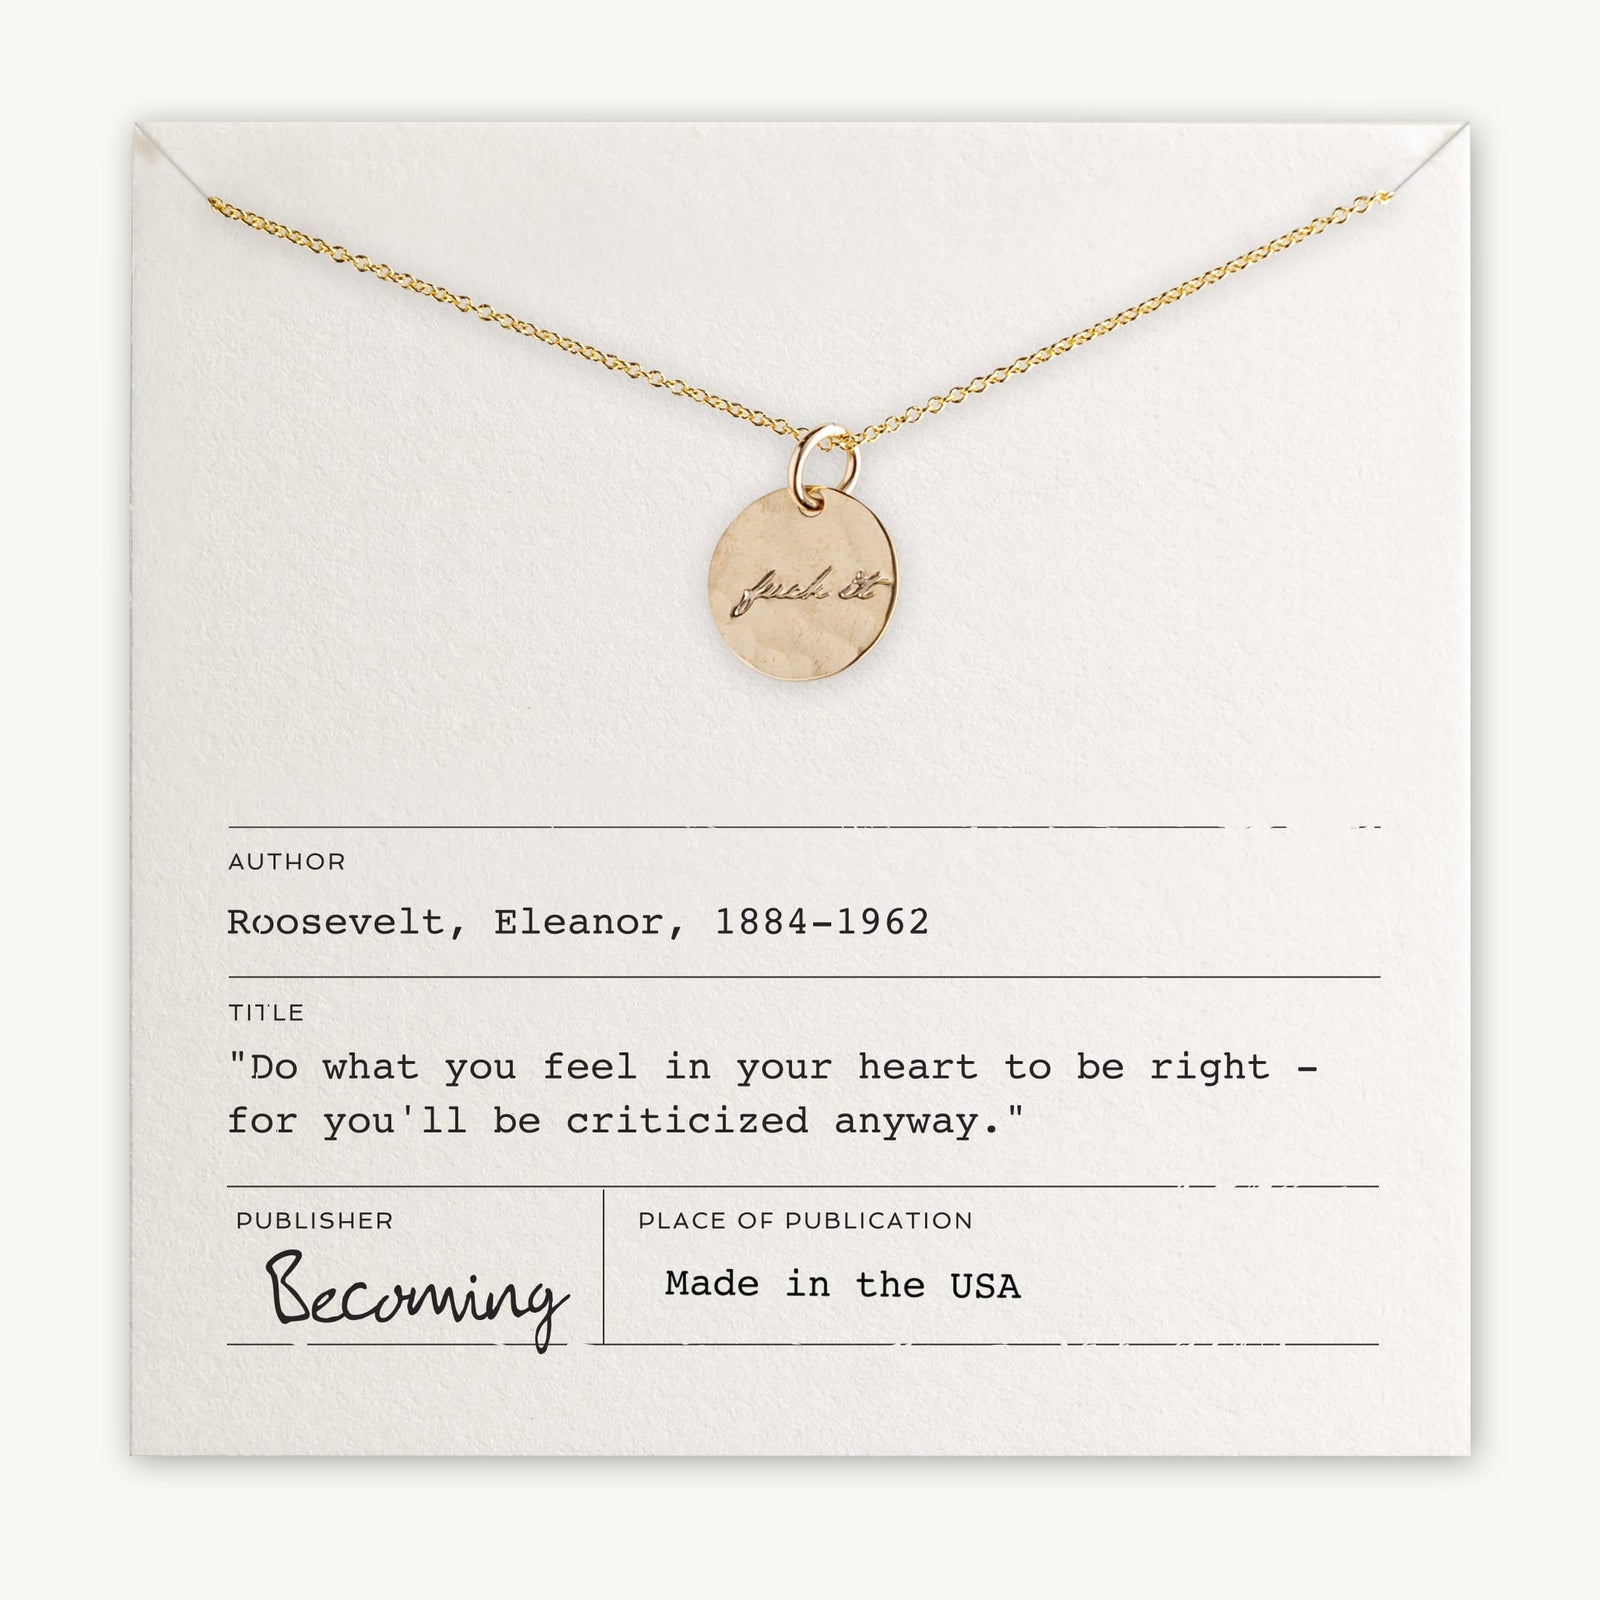 Becoming Jewelry's Fuck It Necklace displayed on a card featuring a quote by Eleanor Roosevelt.